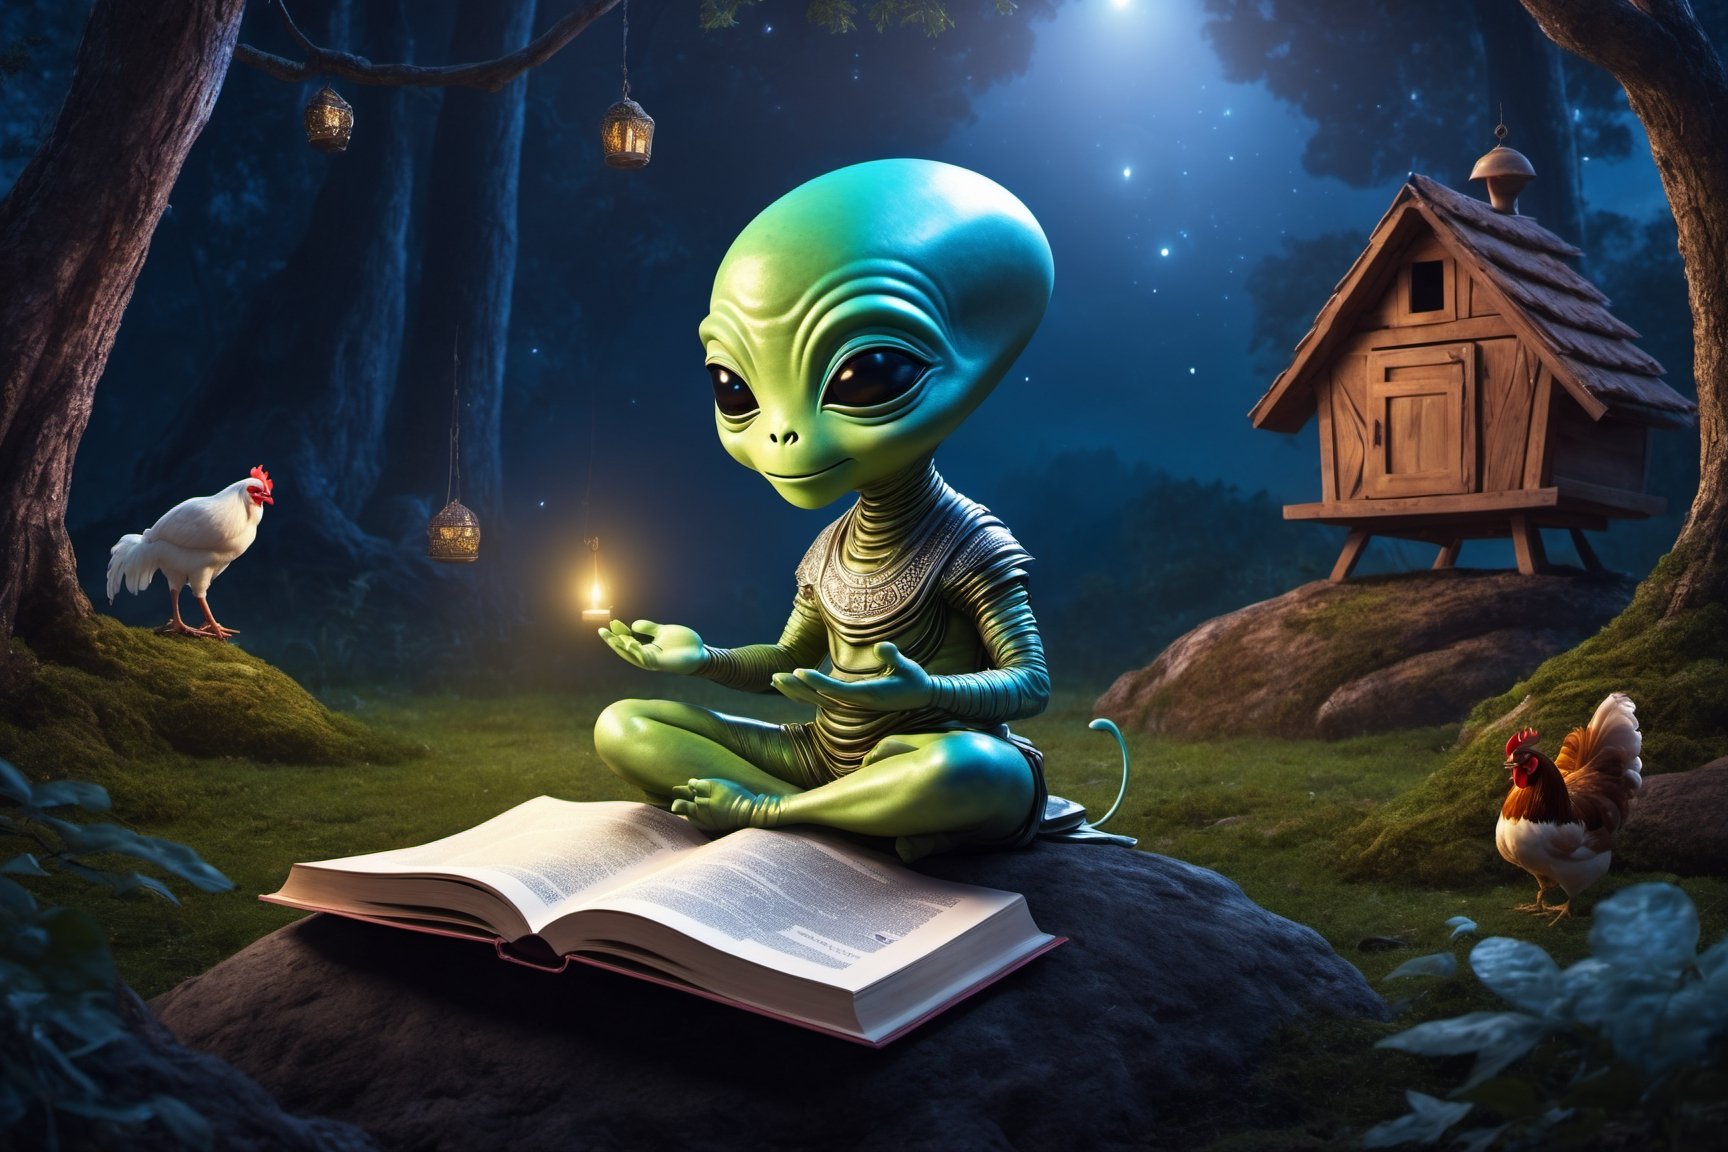 cute alien is meditating in the forest while reading a spiritual book. he is wearing a headband. there are mystical books near the alien and behind there is a chicken coop. in artistic style, night background, masterpiece, realistic, highly detailed, movie still,